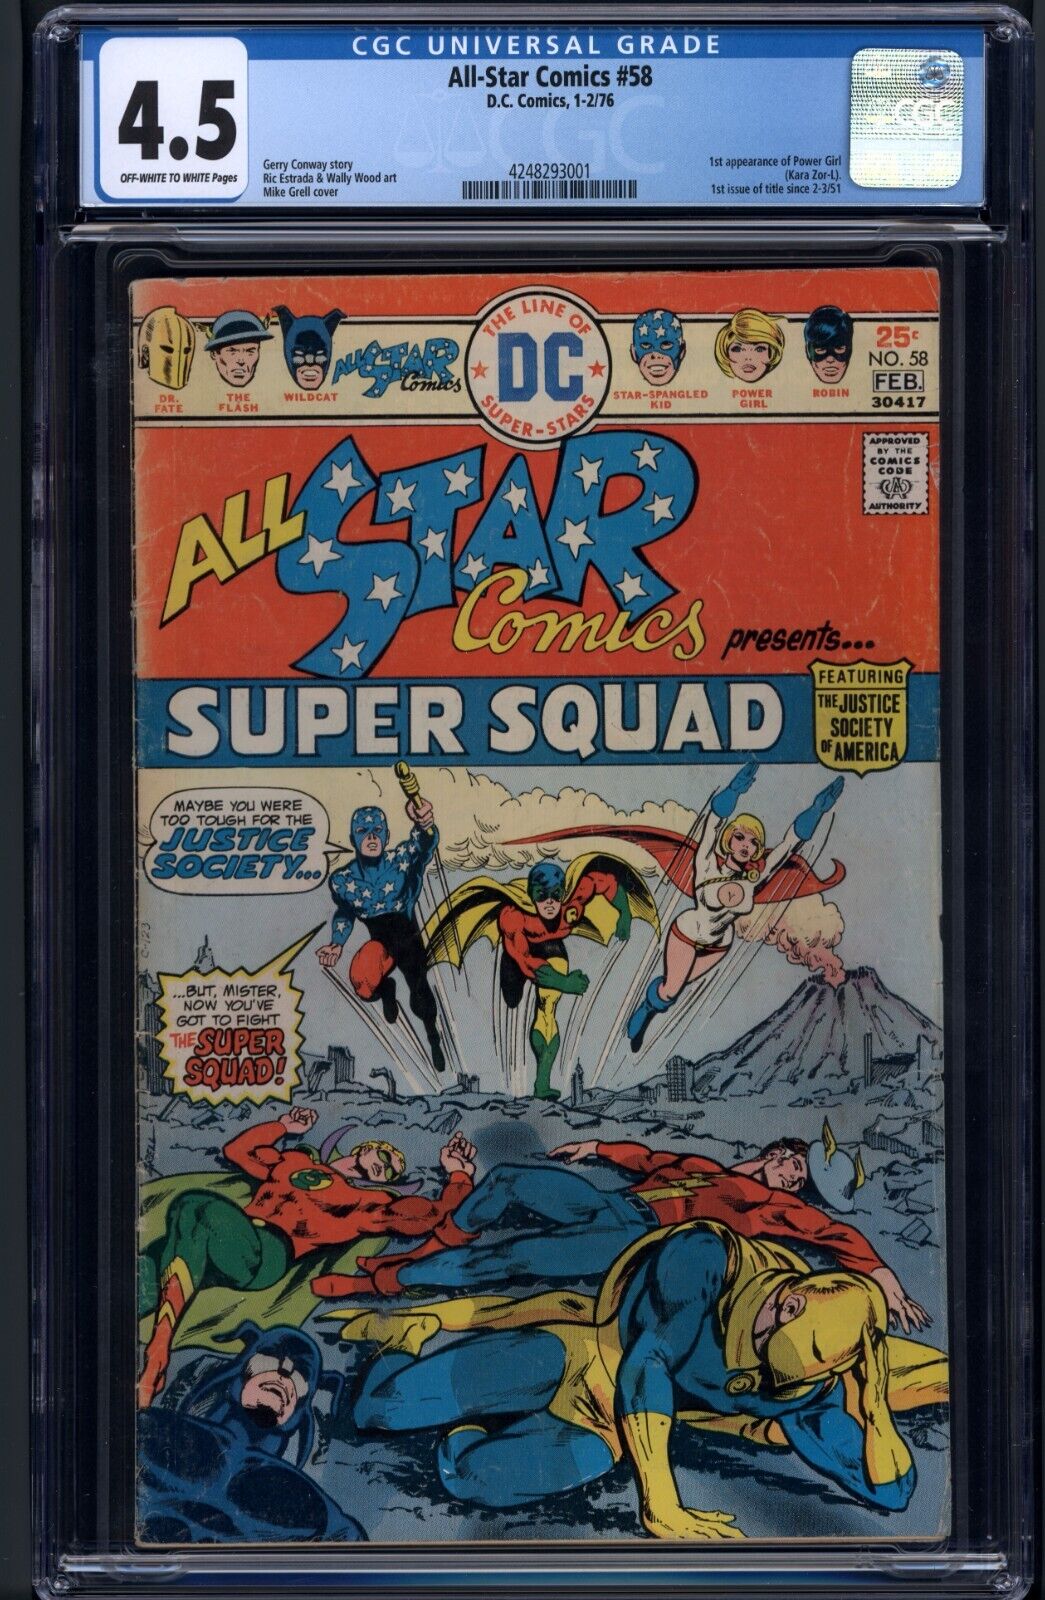 All-Star Comics #58 - CGC 4.5 - 1st Appearance of Power Girl - 4248293001